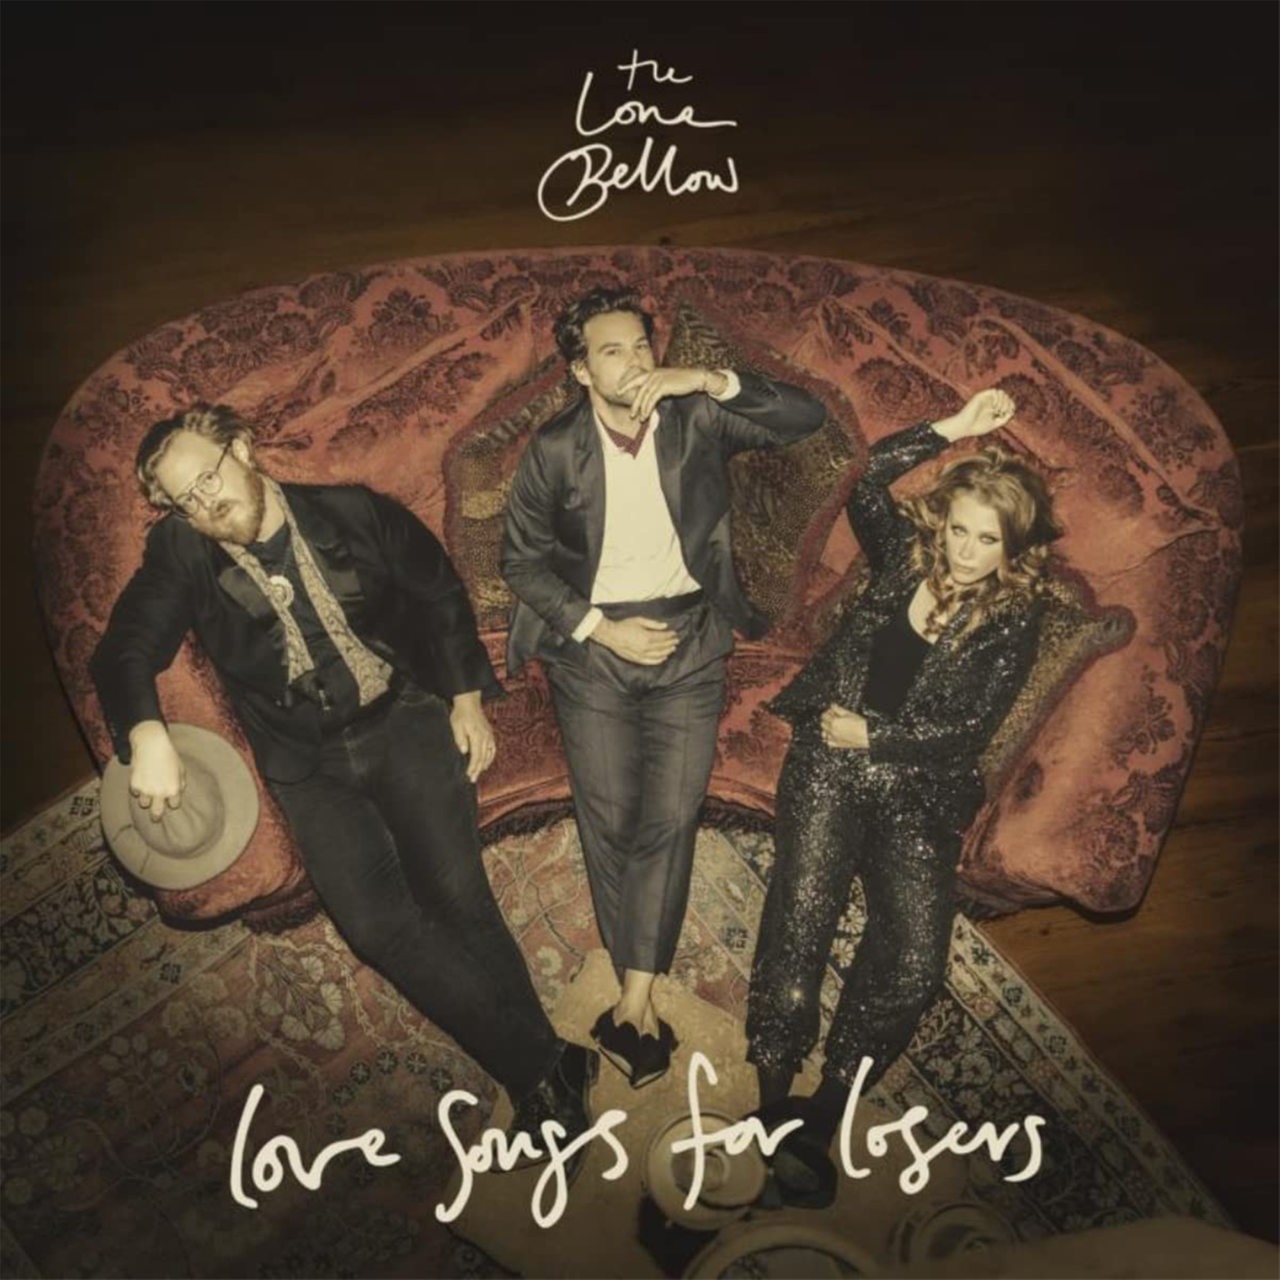 Cover: The Lone Bellow, Love Songs for Losers, Dualtone (H'Art)